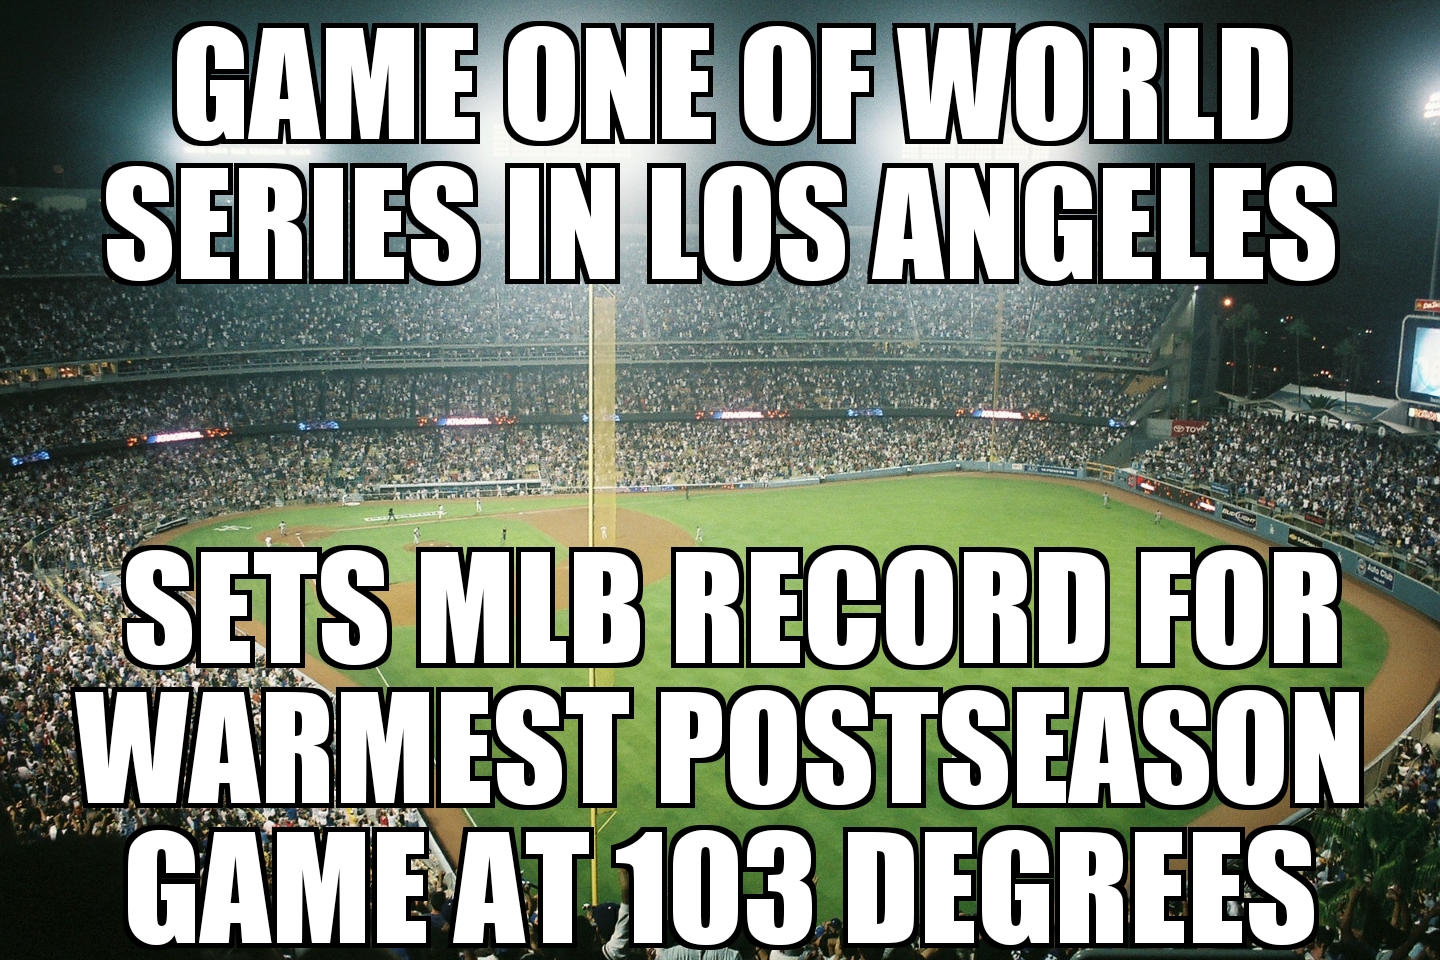 World Series game one sets temperature record